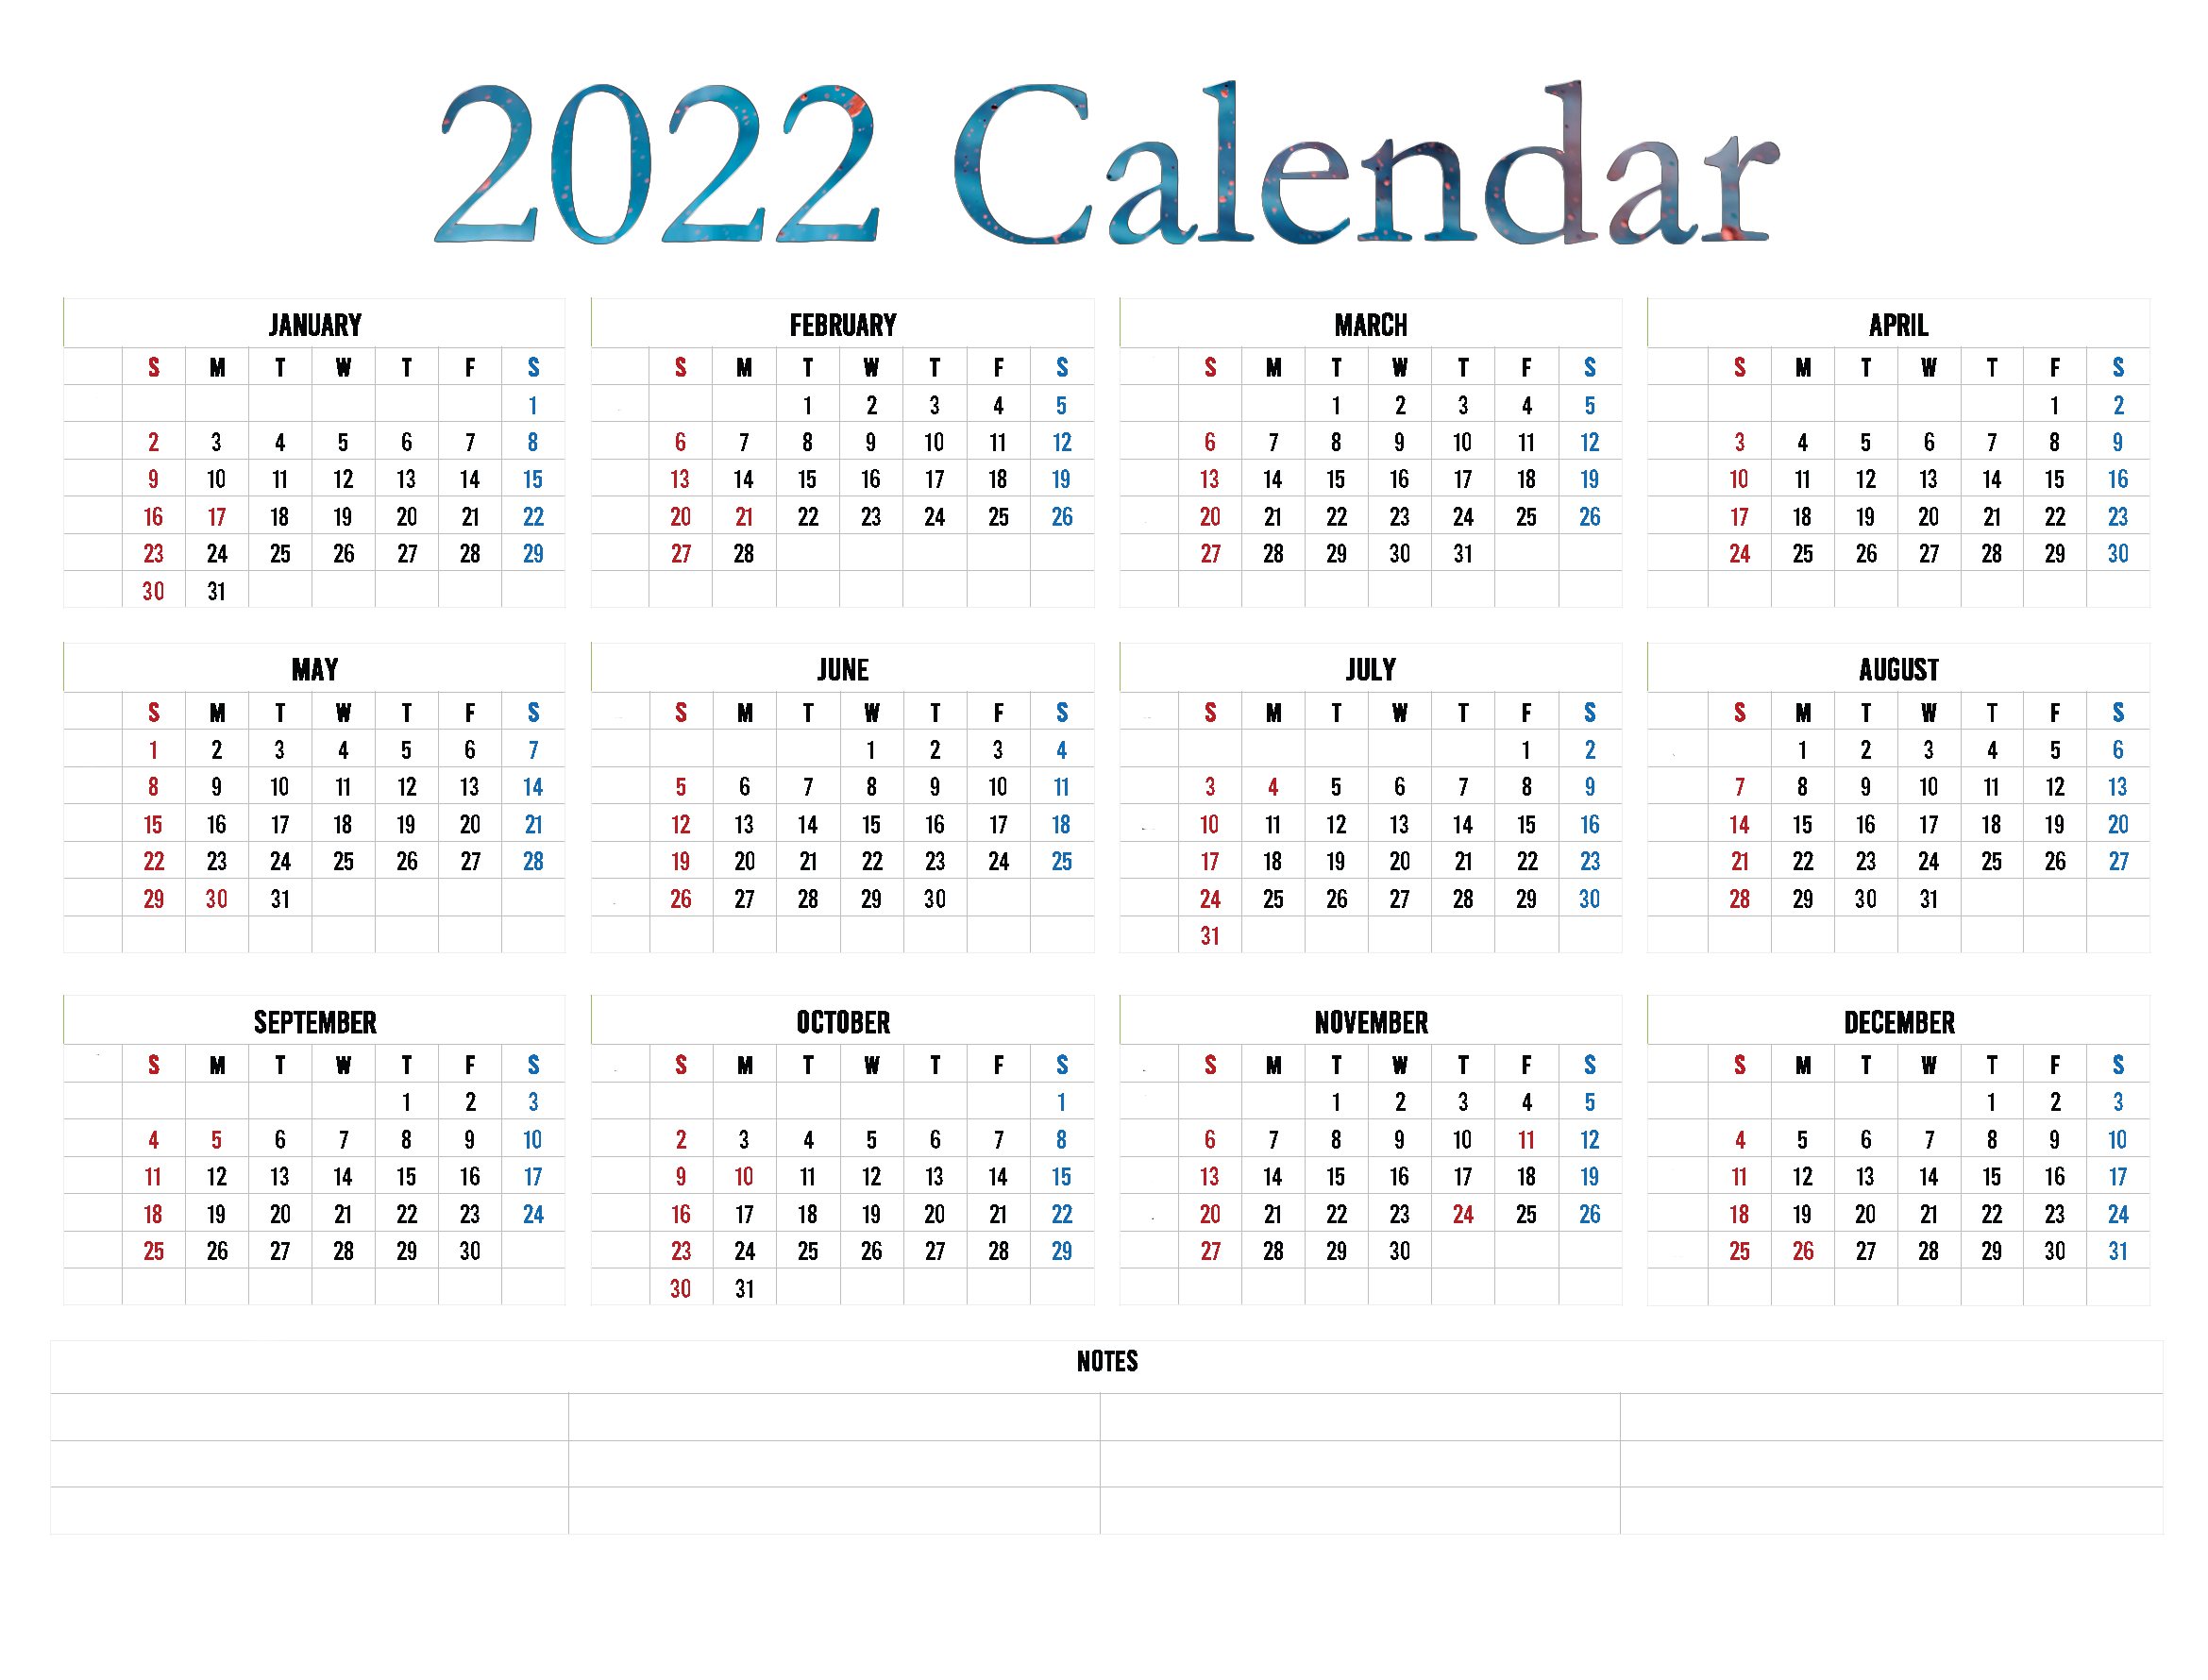 Spreadsheet Timescale Calendar Timetable Scale PNG